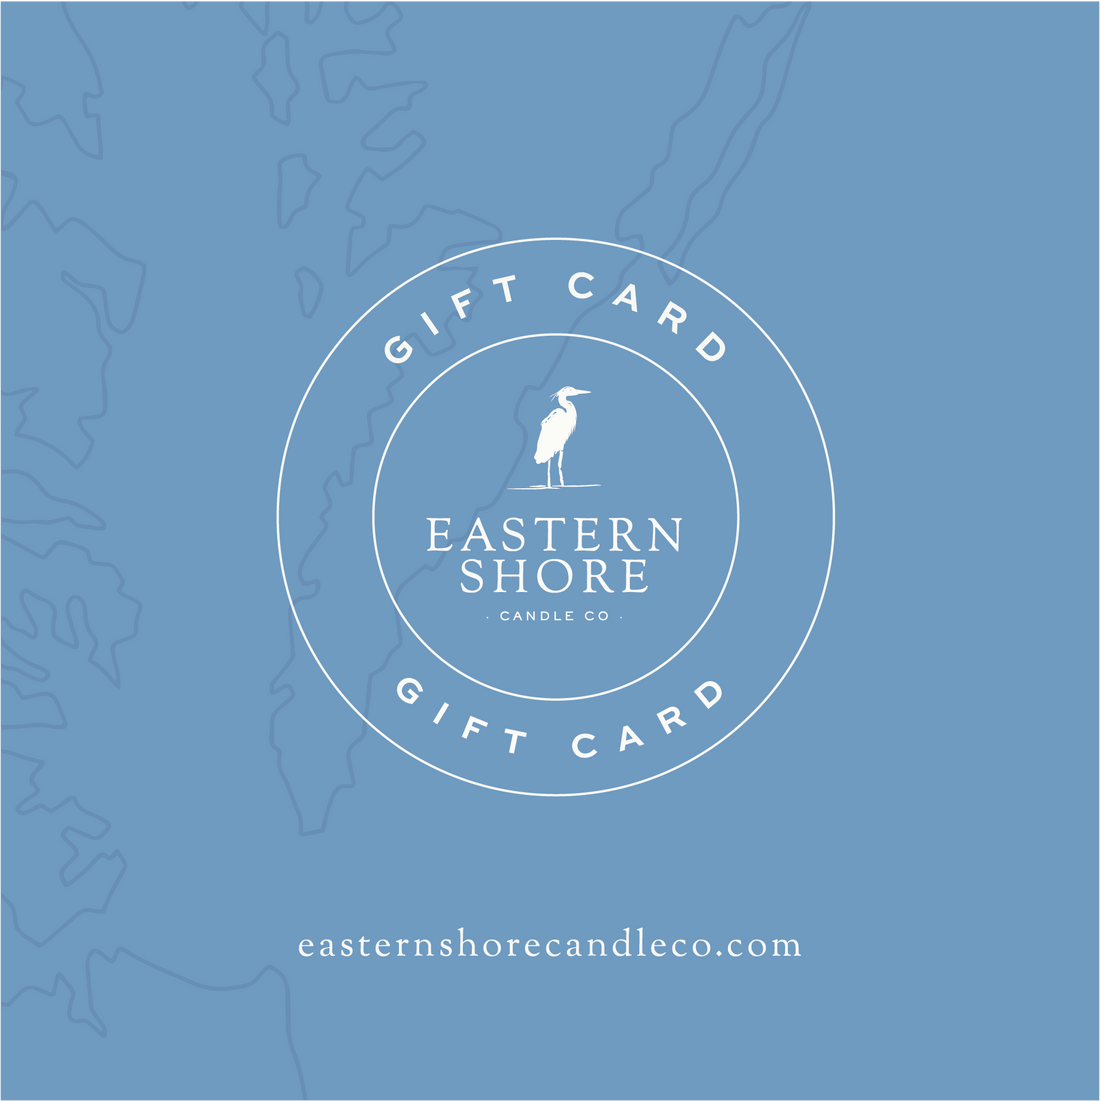 Digital gift cards, gift cards for him, gift cards for her, scented candle gifts, luxury candles, handmade candles, hand poured candles, gift cards, easter shore, maryland, cambridge, easton, virginia, annapolis